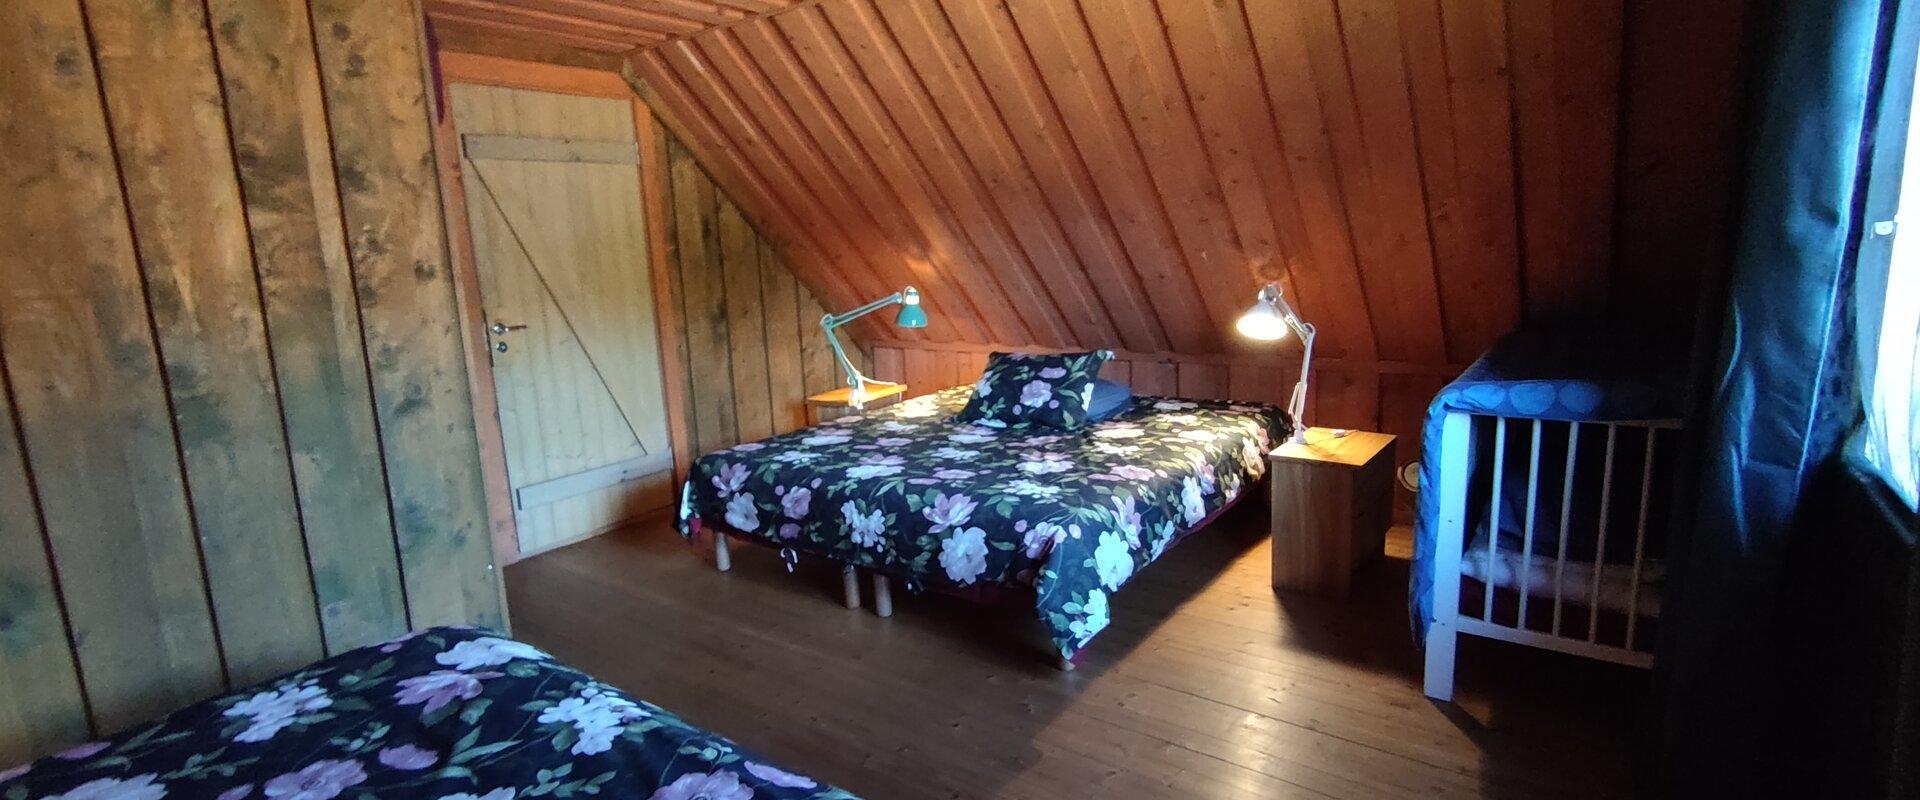 Markna Tourist Farm Sauna House - small bedroom with a crib and a twin bed.